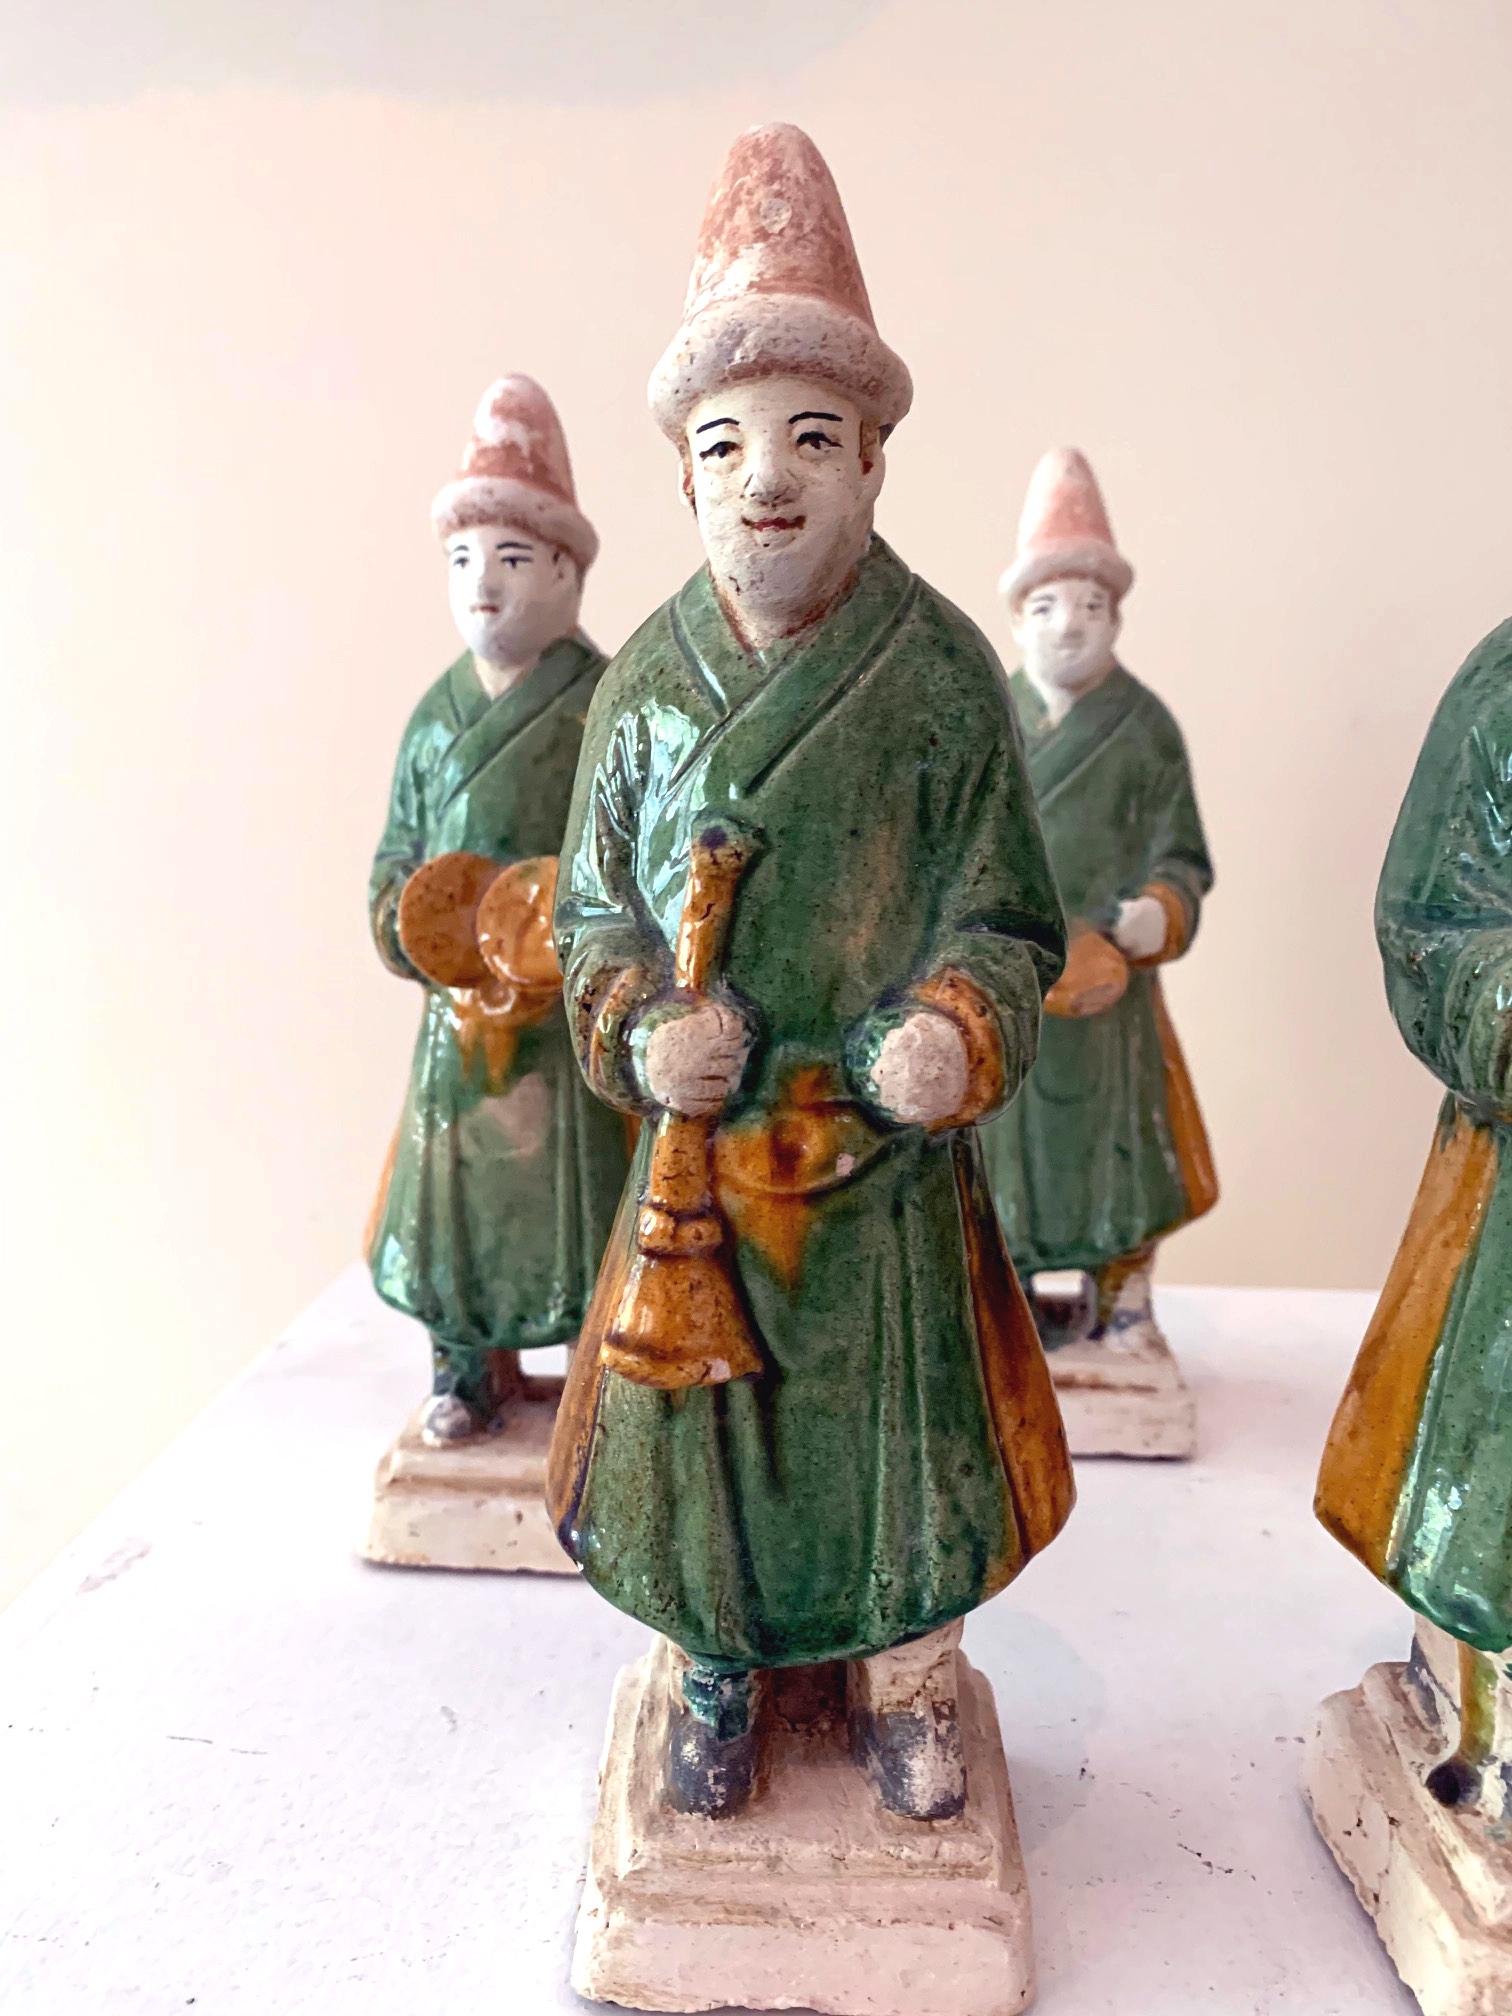 Chinese Set of Five Stoneware Tomb Figurines of Musician Ming Dynasty For Sale